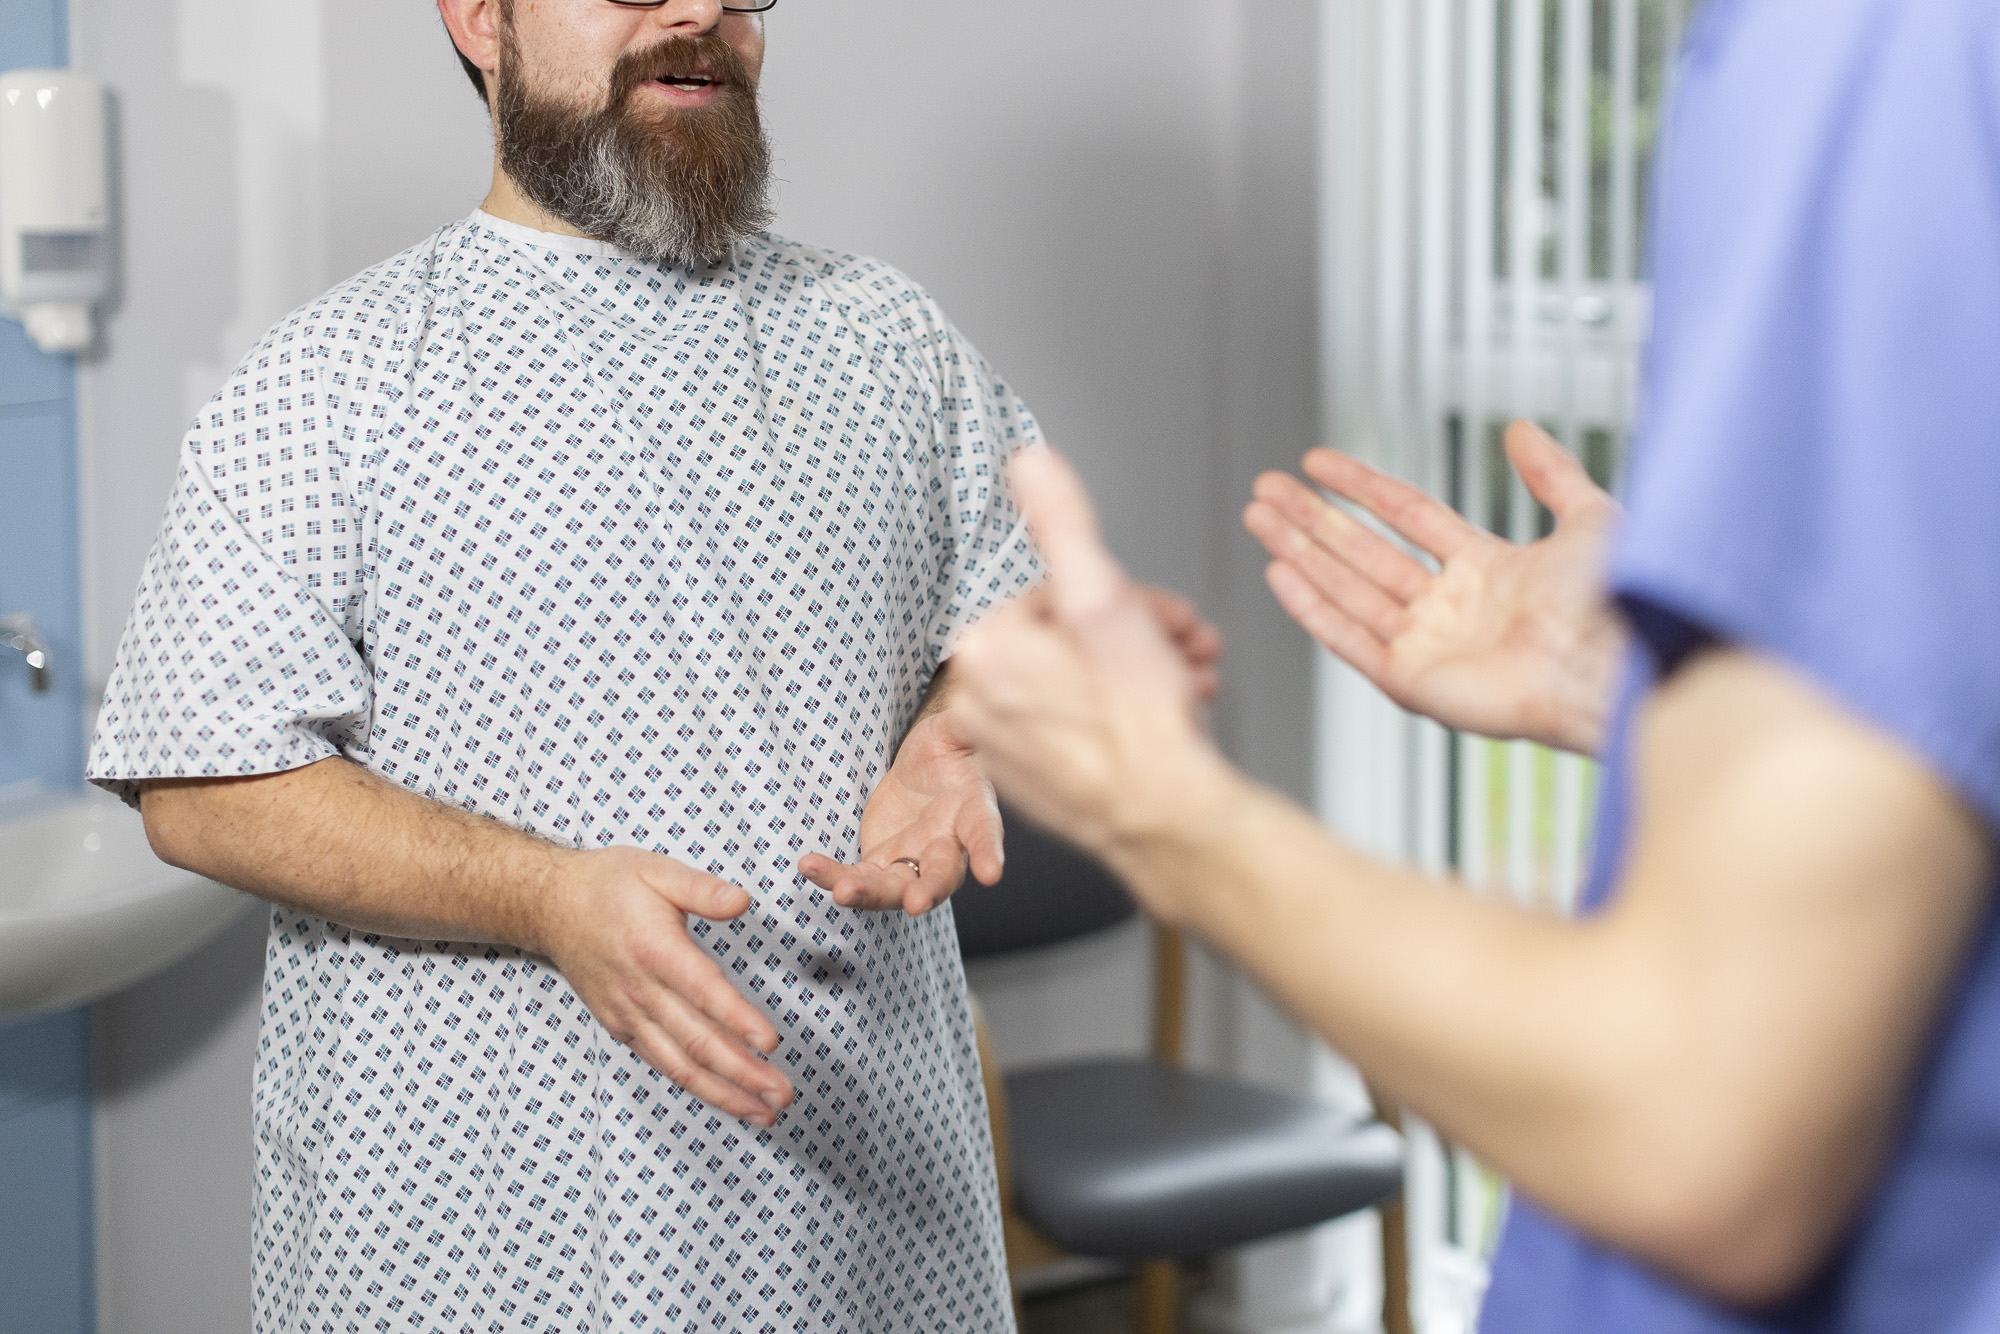 Person wearing scrubs speaking to a patient wearing hospital gown